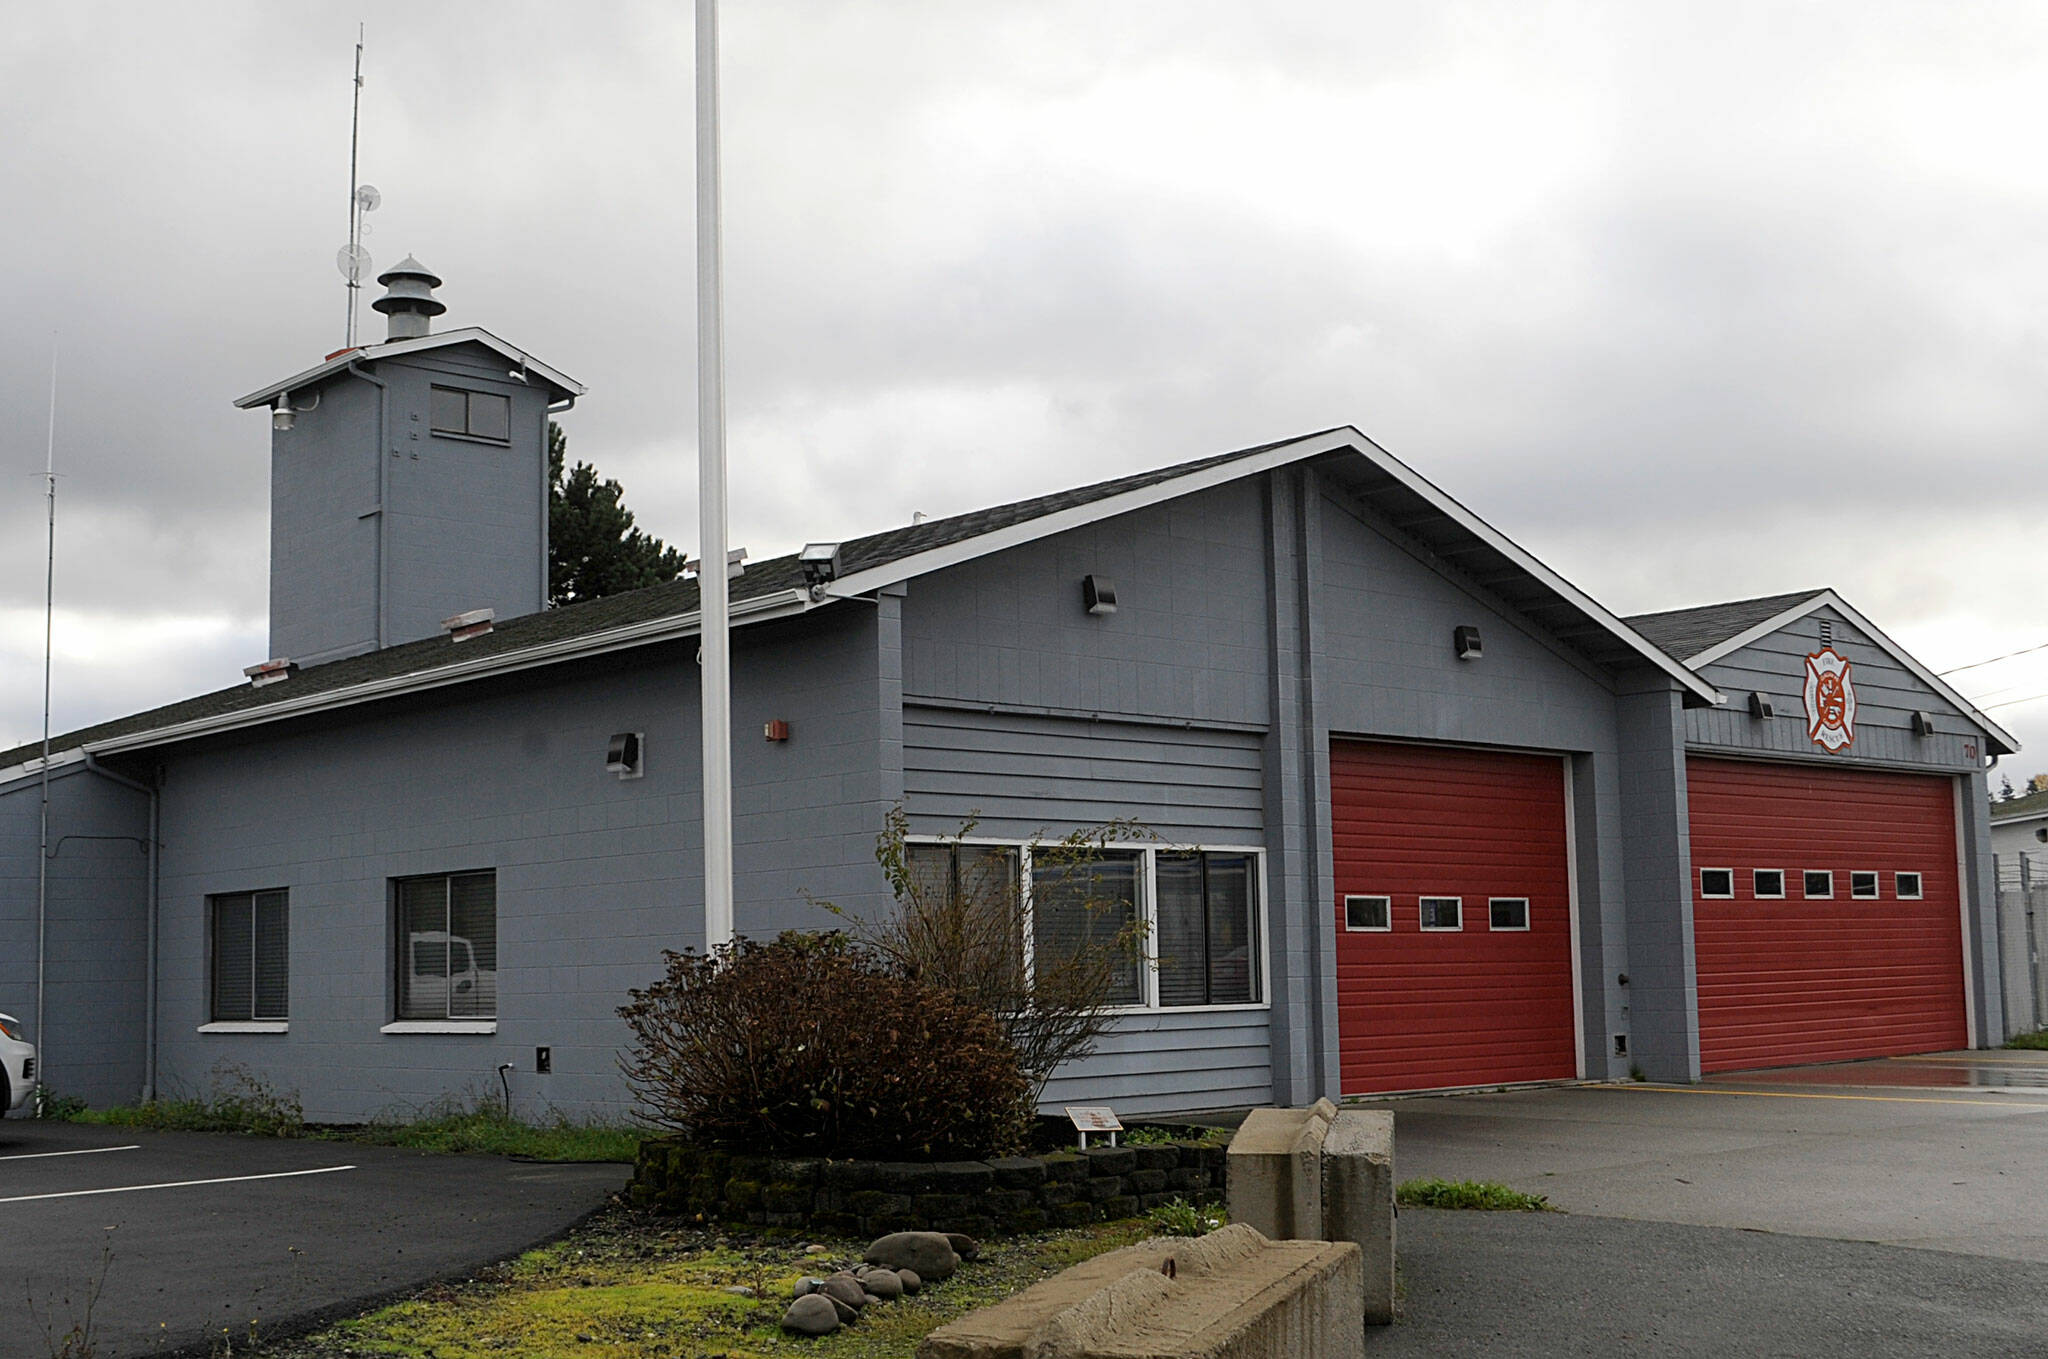 The application process is open to architects to design new fire stations in Carlsborg, pictured, and Dungeness for Clallam County Fire District 3. (Matthew Nash/Olympic Peninsula News Group)